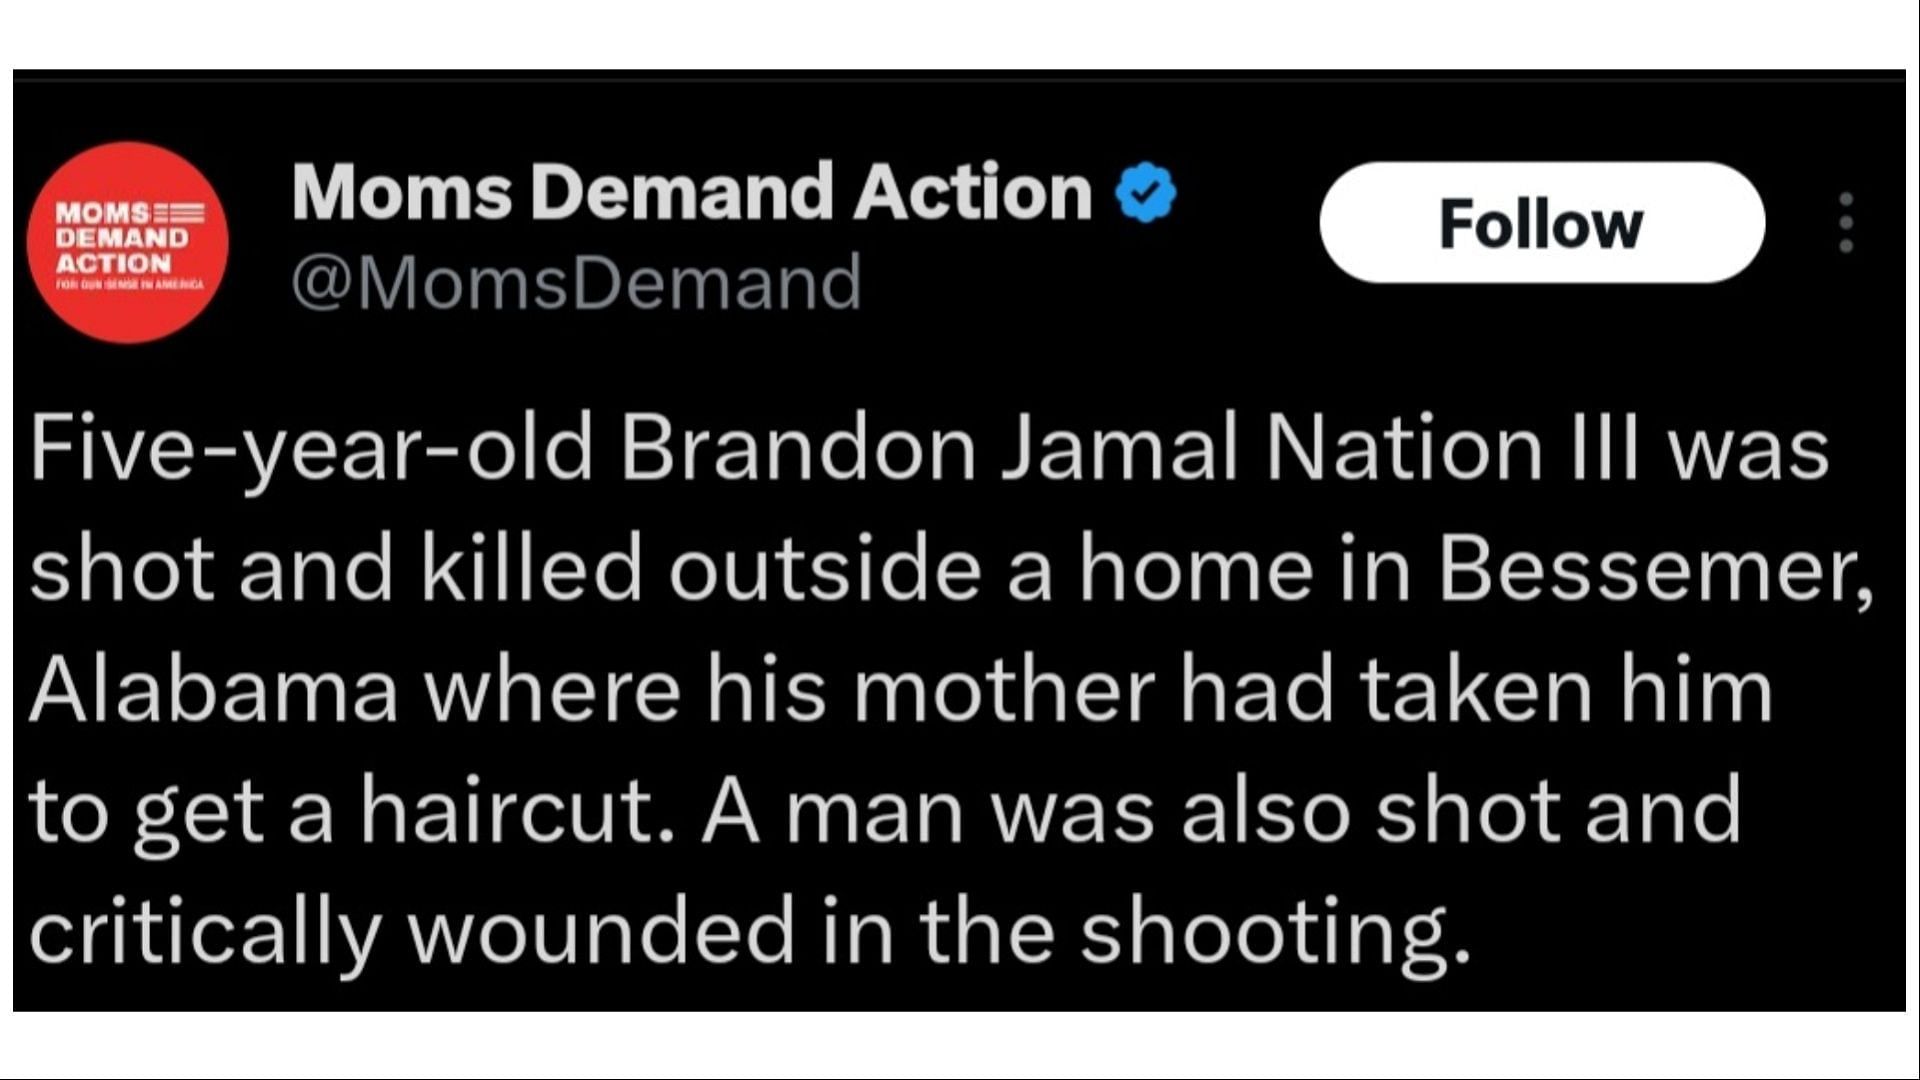 Authorities are looking for more suspects in the shooting that killer Brandon Jamal Nation III, (Image via @MomsDemand/X)